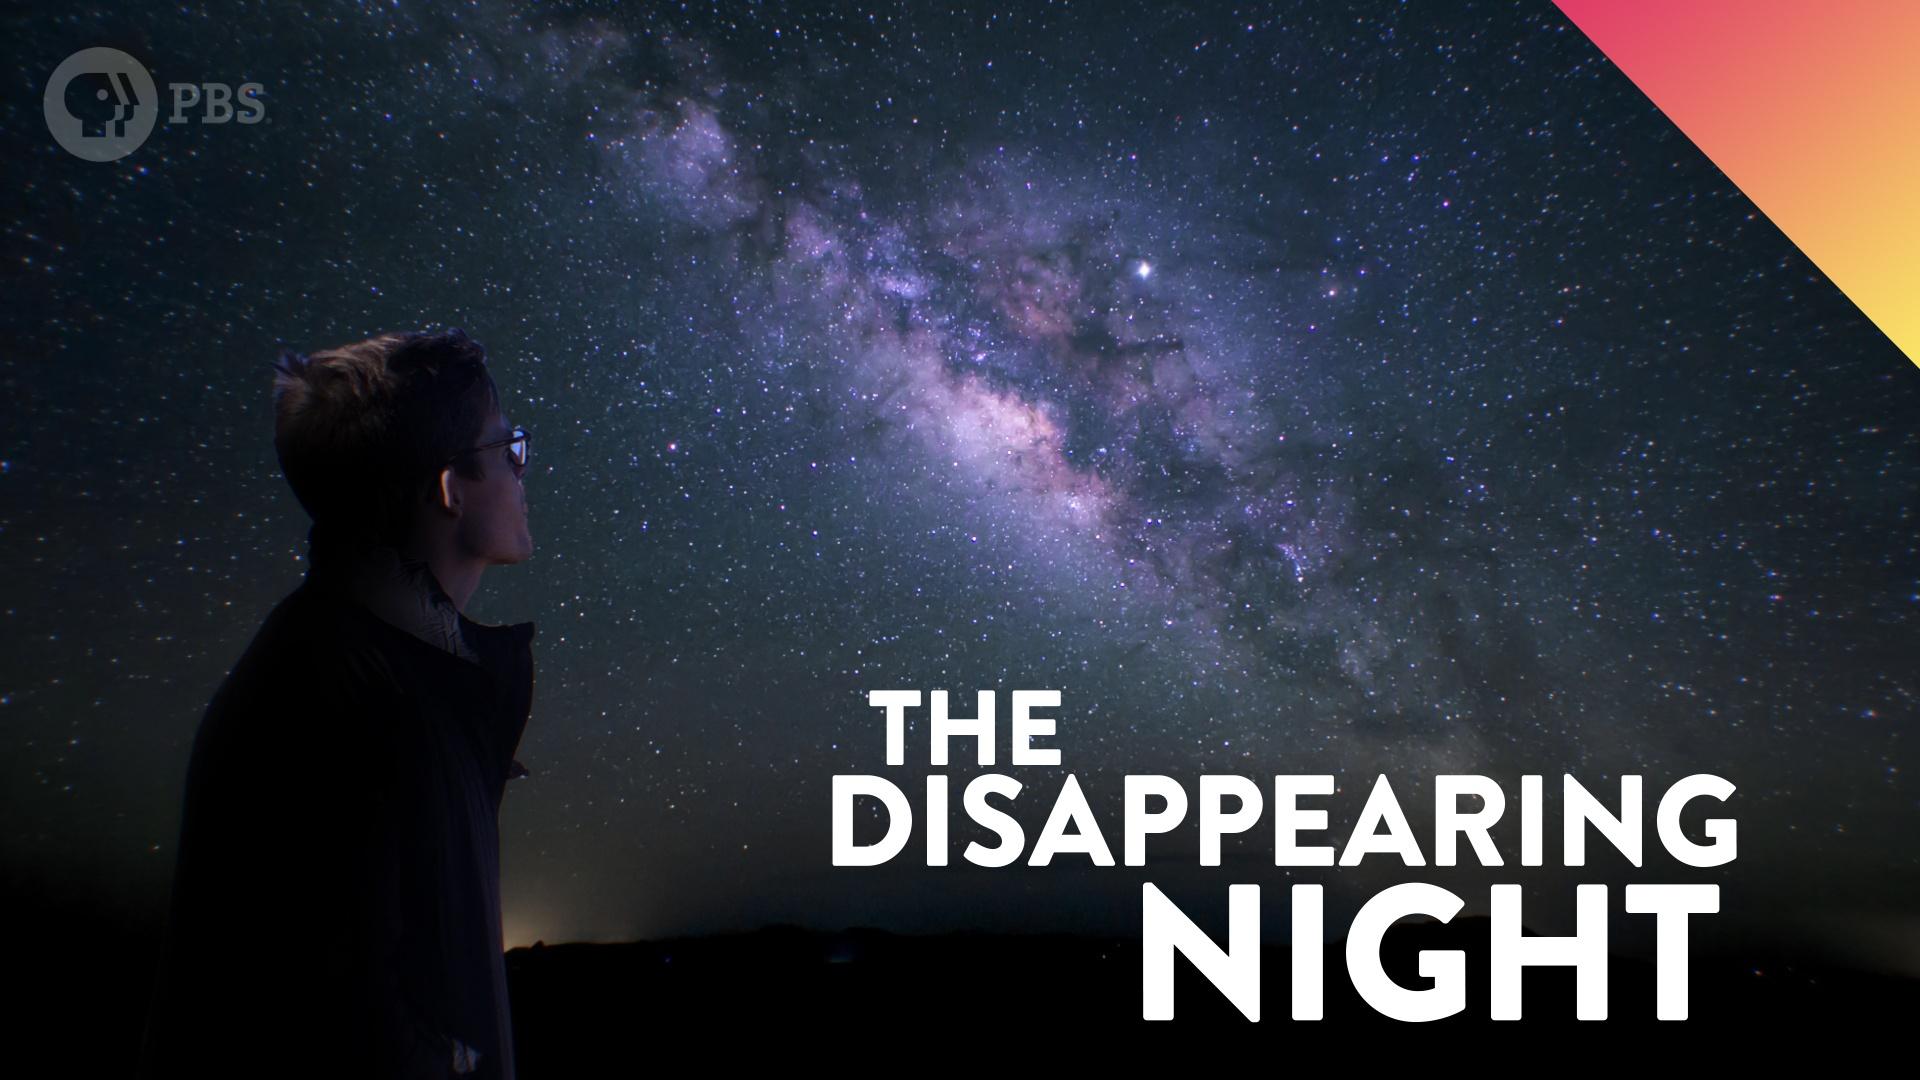 Be Smart Why We Are Losing the Night Sky Season 7 Episode 16 image